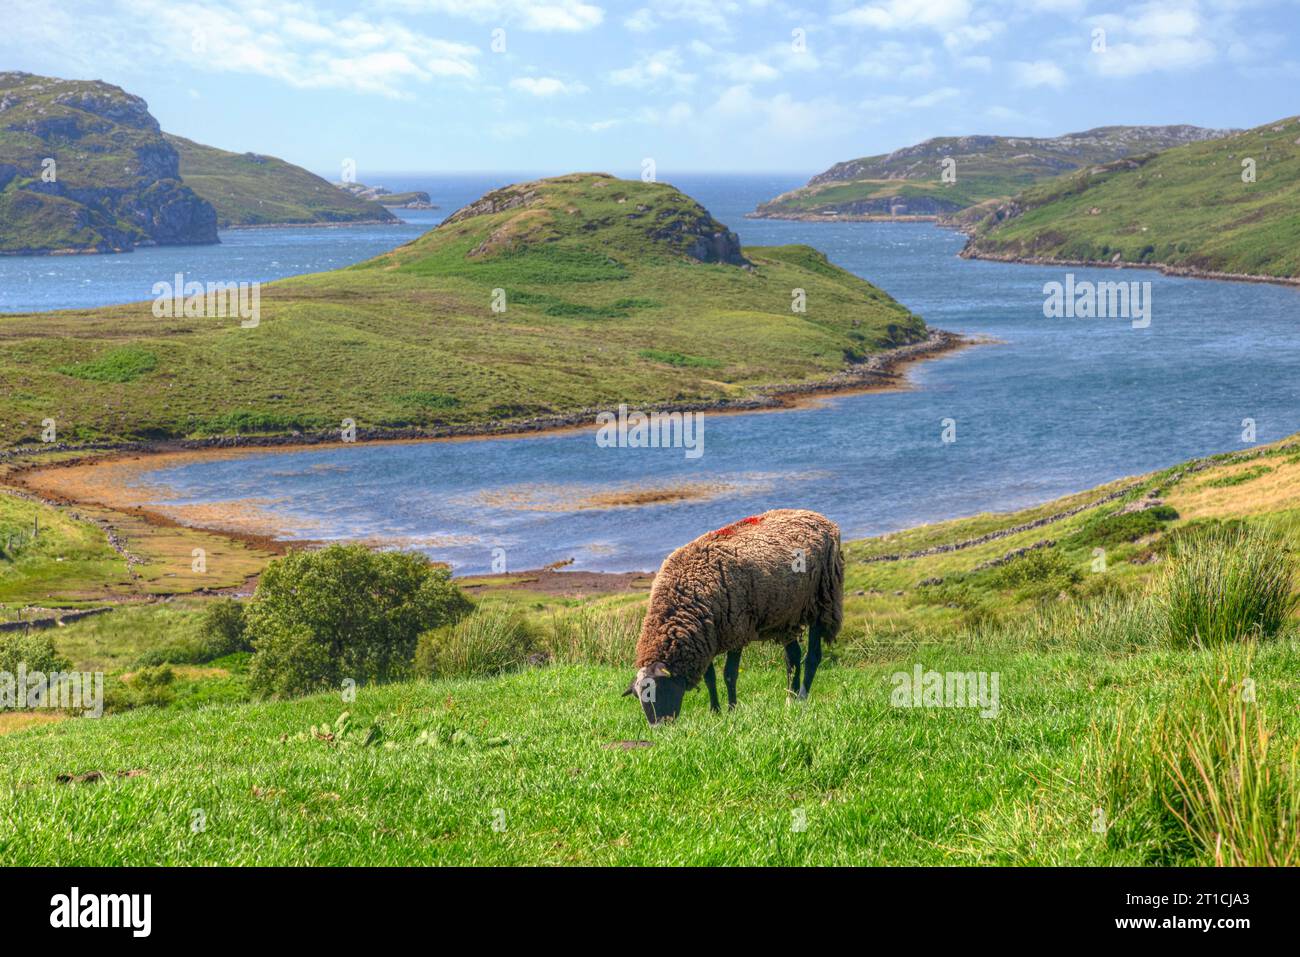 Loch Inchard is a sea loch located in Durness, Sutherland, Scotland. Stock Photo